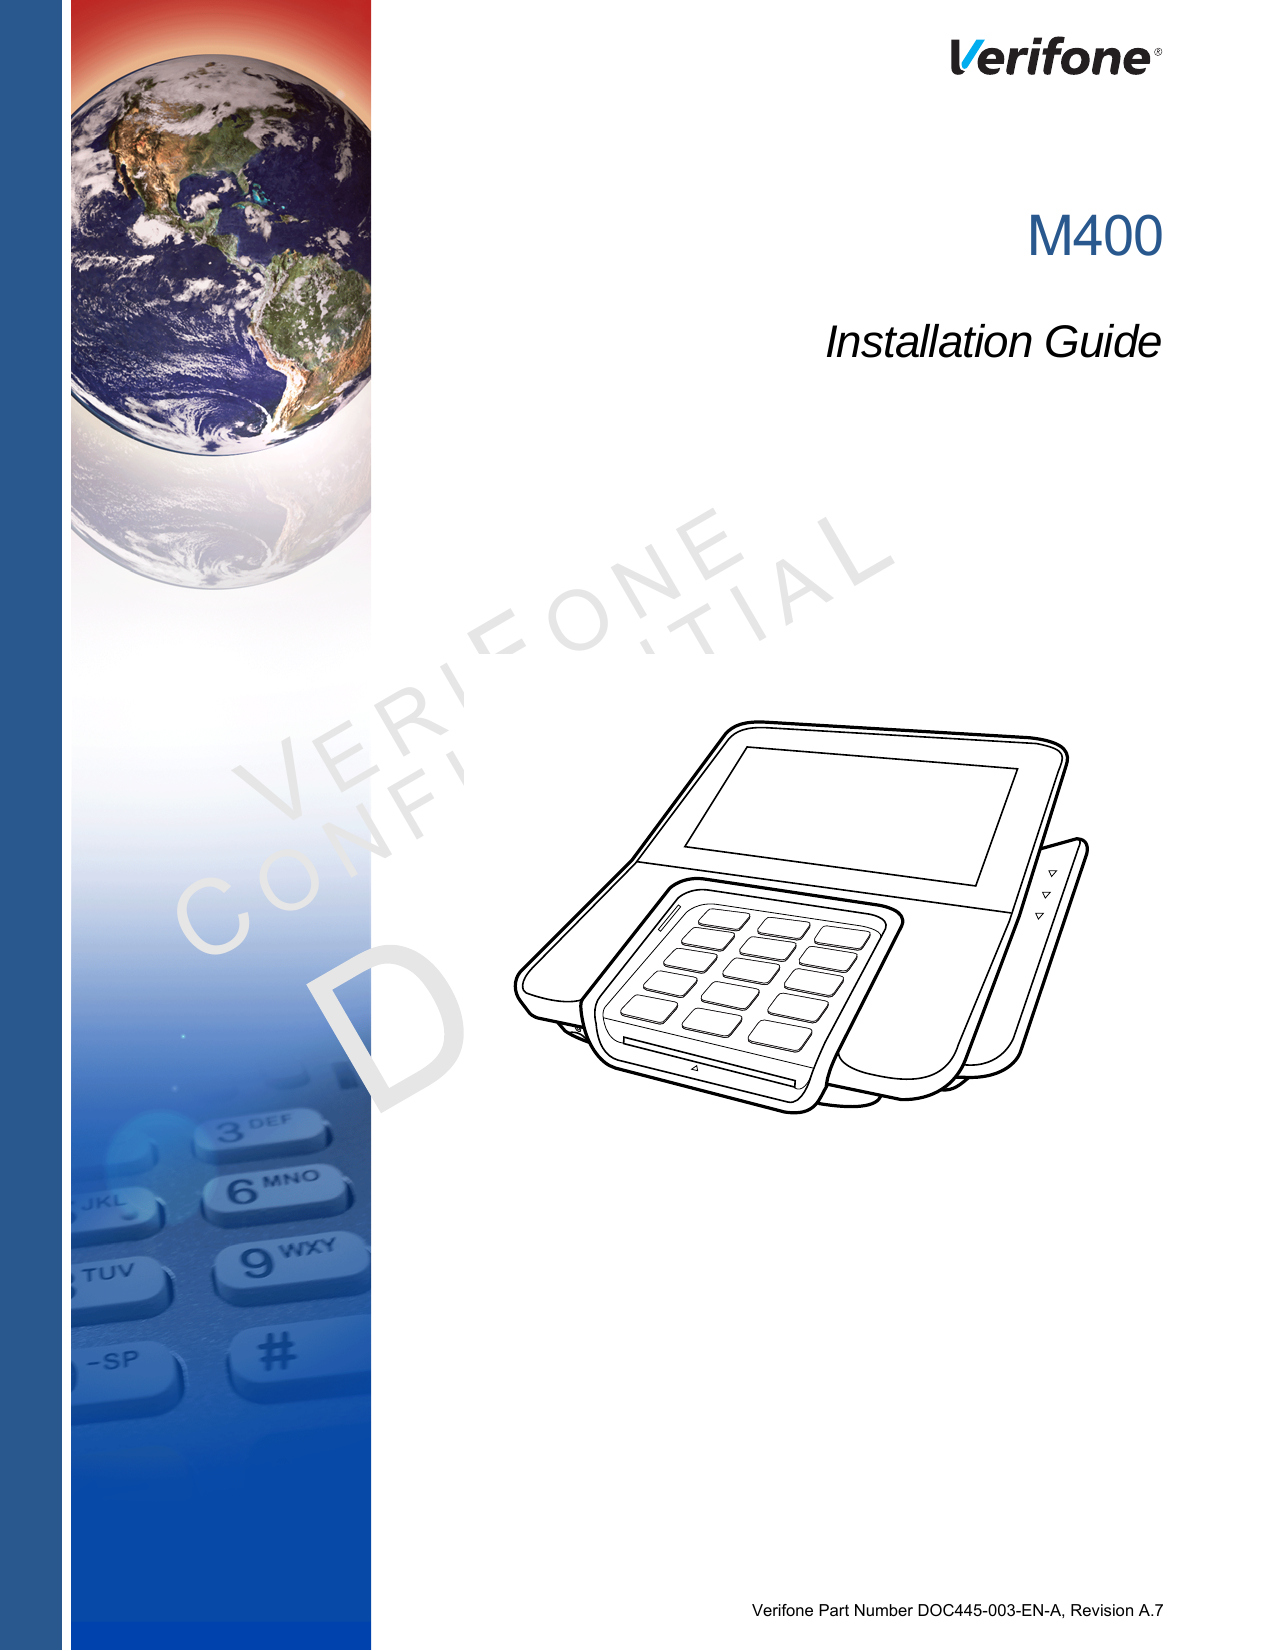 Verifone Part Number DOC445-003-EN-A, Revision A.7VER I FO N ECONFID E NTIALREVISIO N  A.7 M400Installation Guide